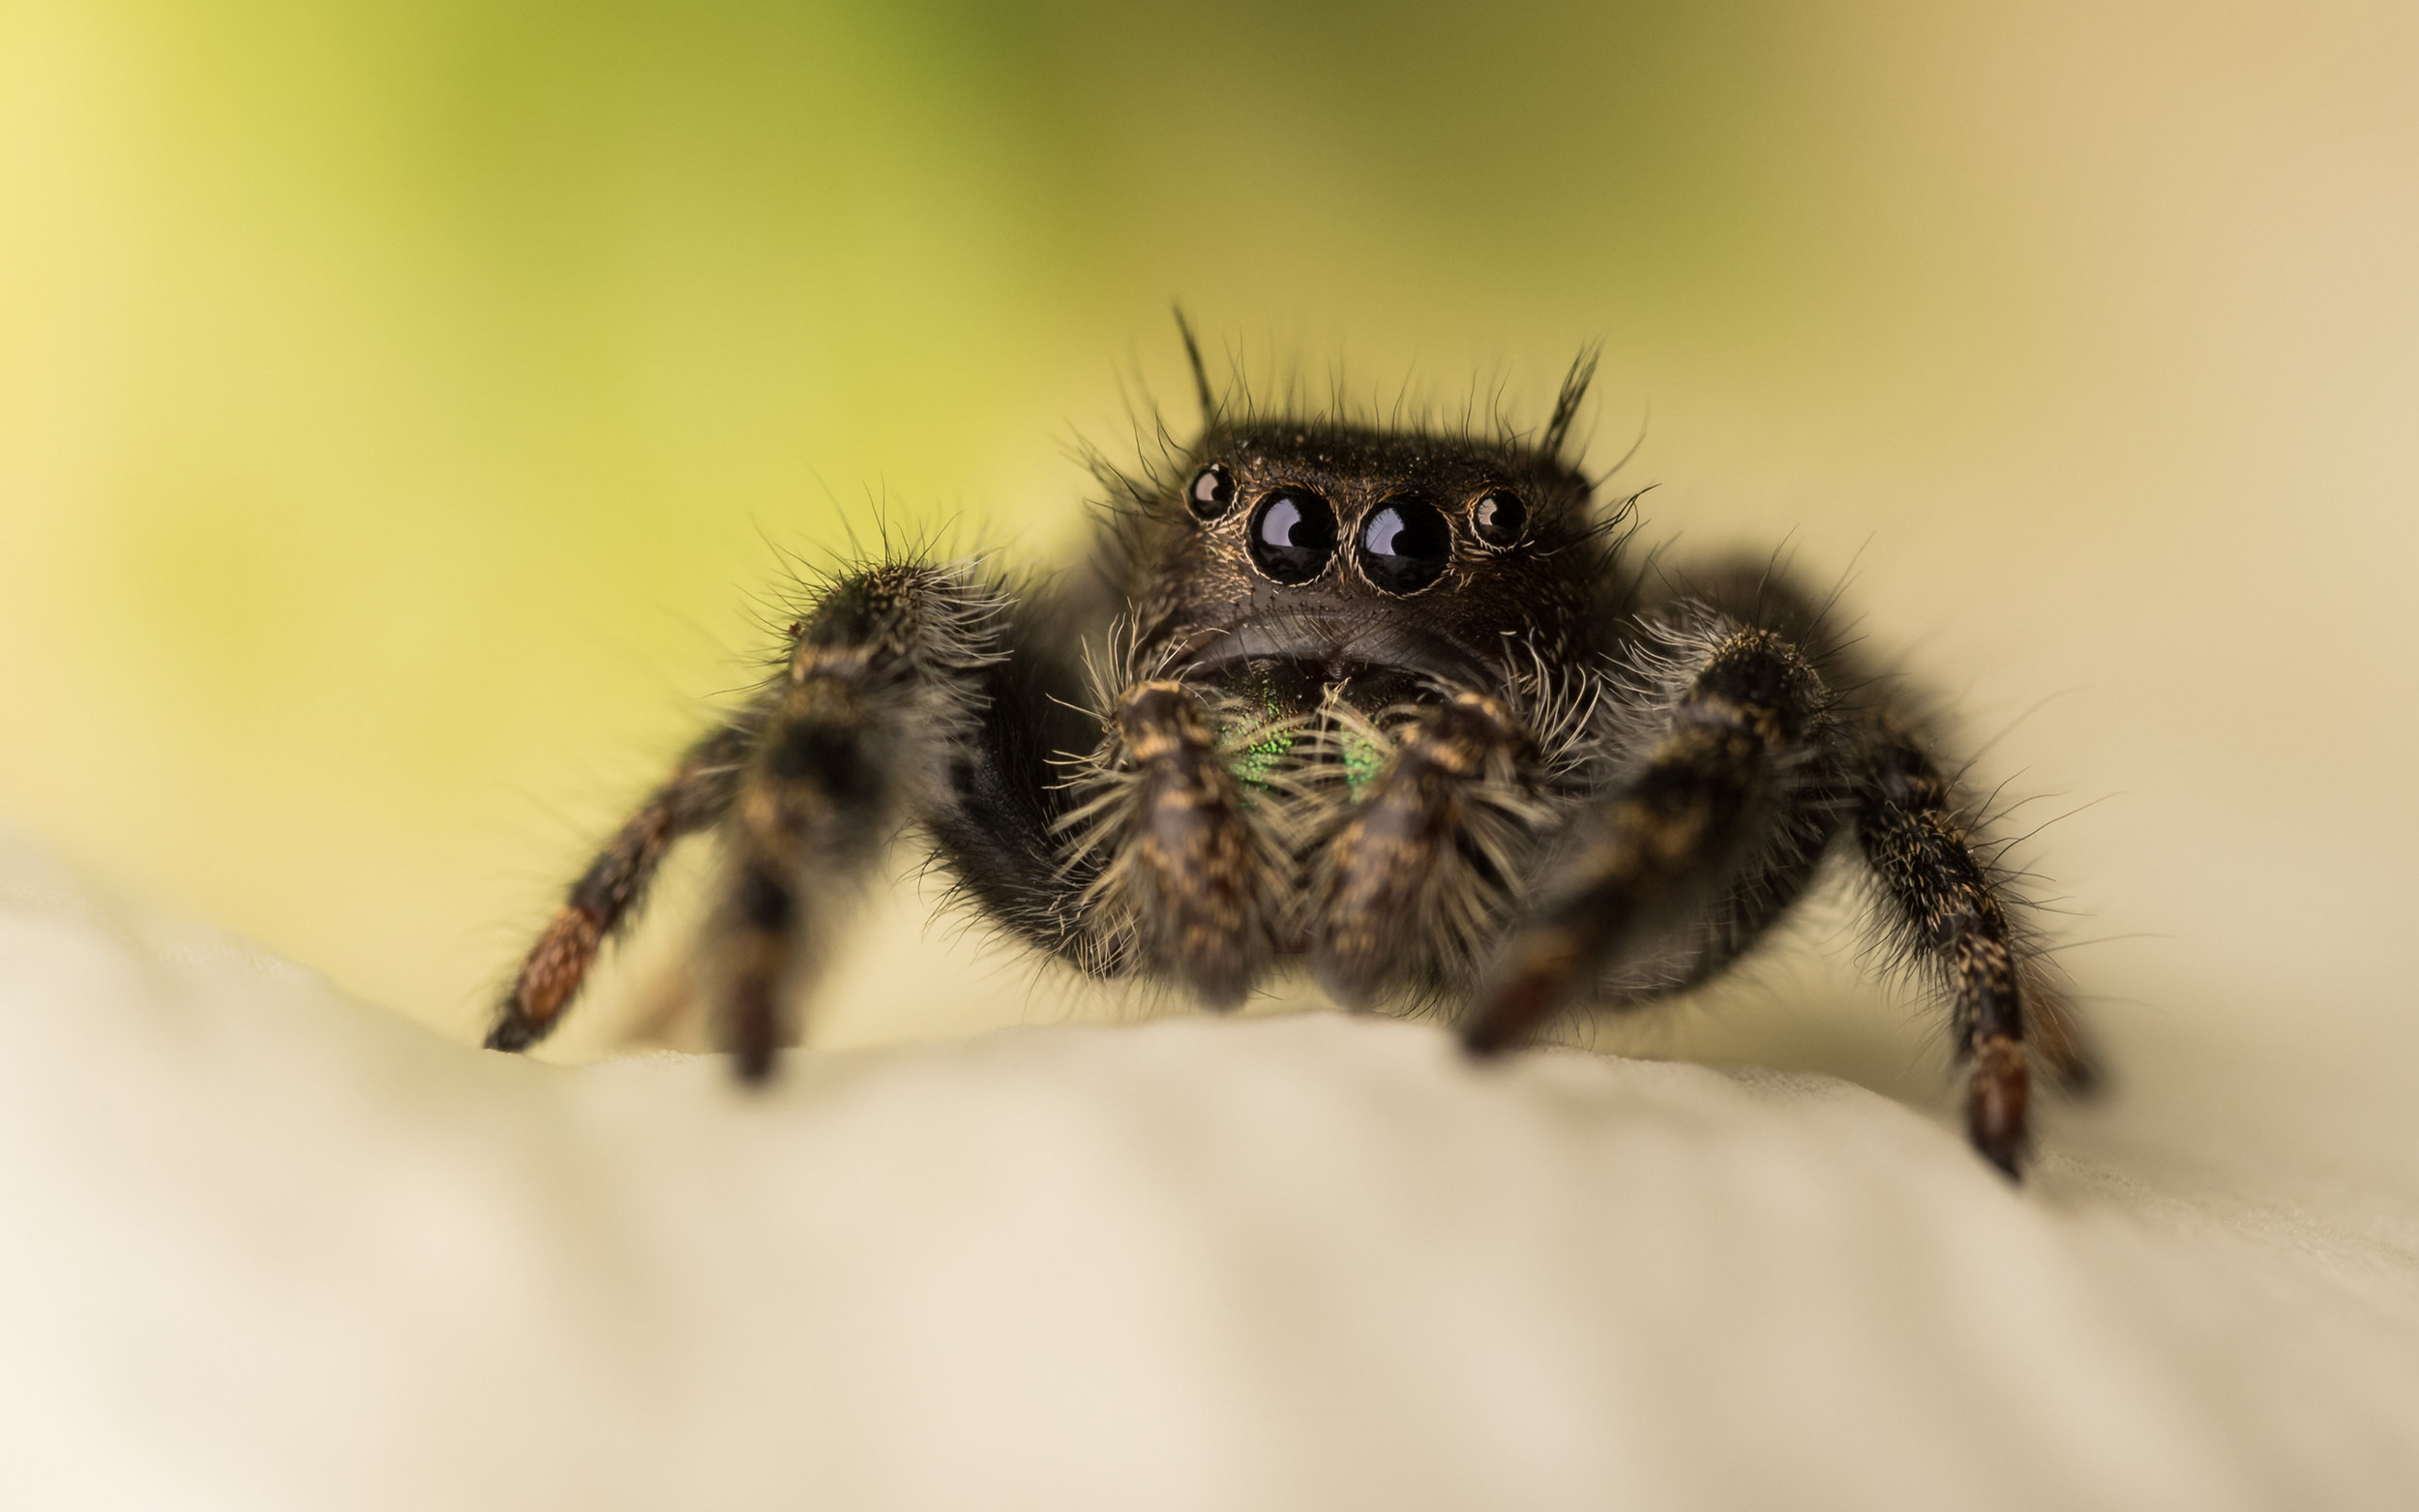 "The Bold" Jumping Spider